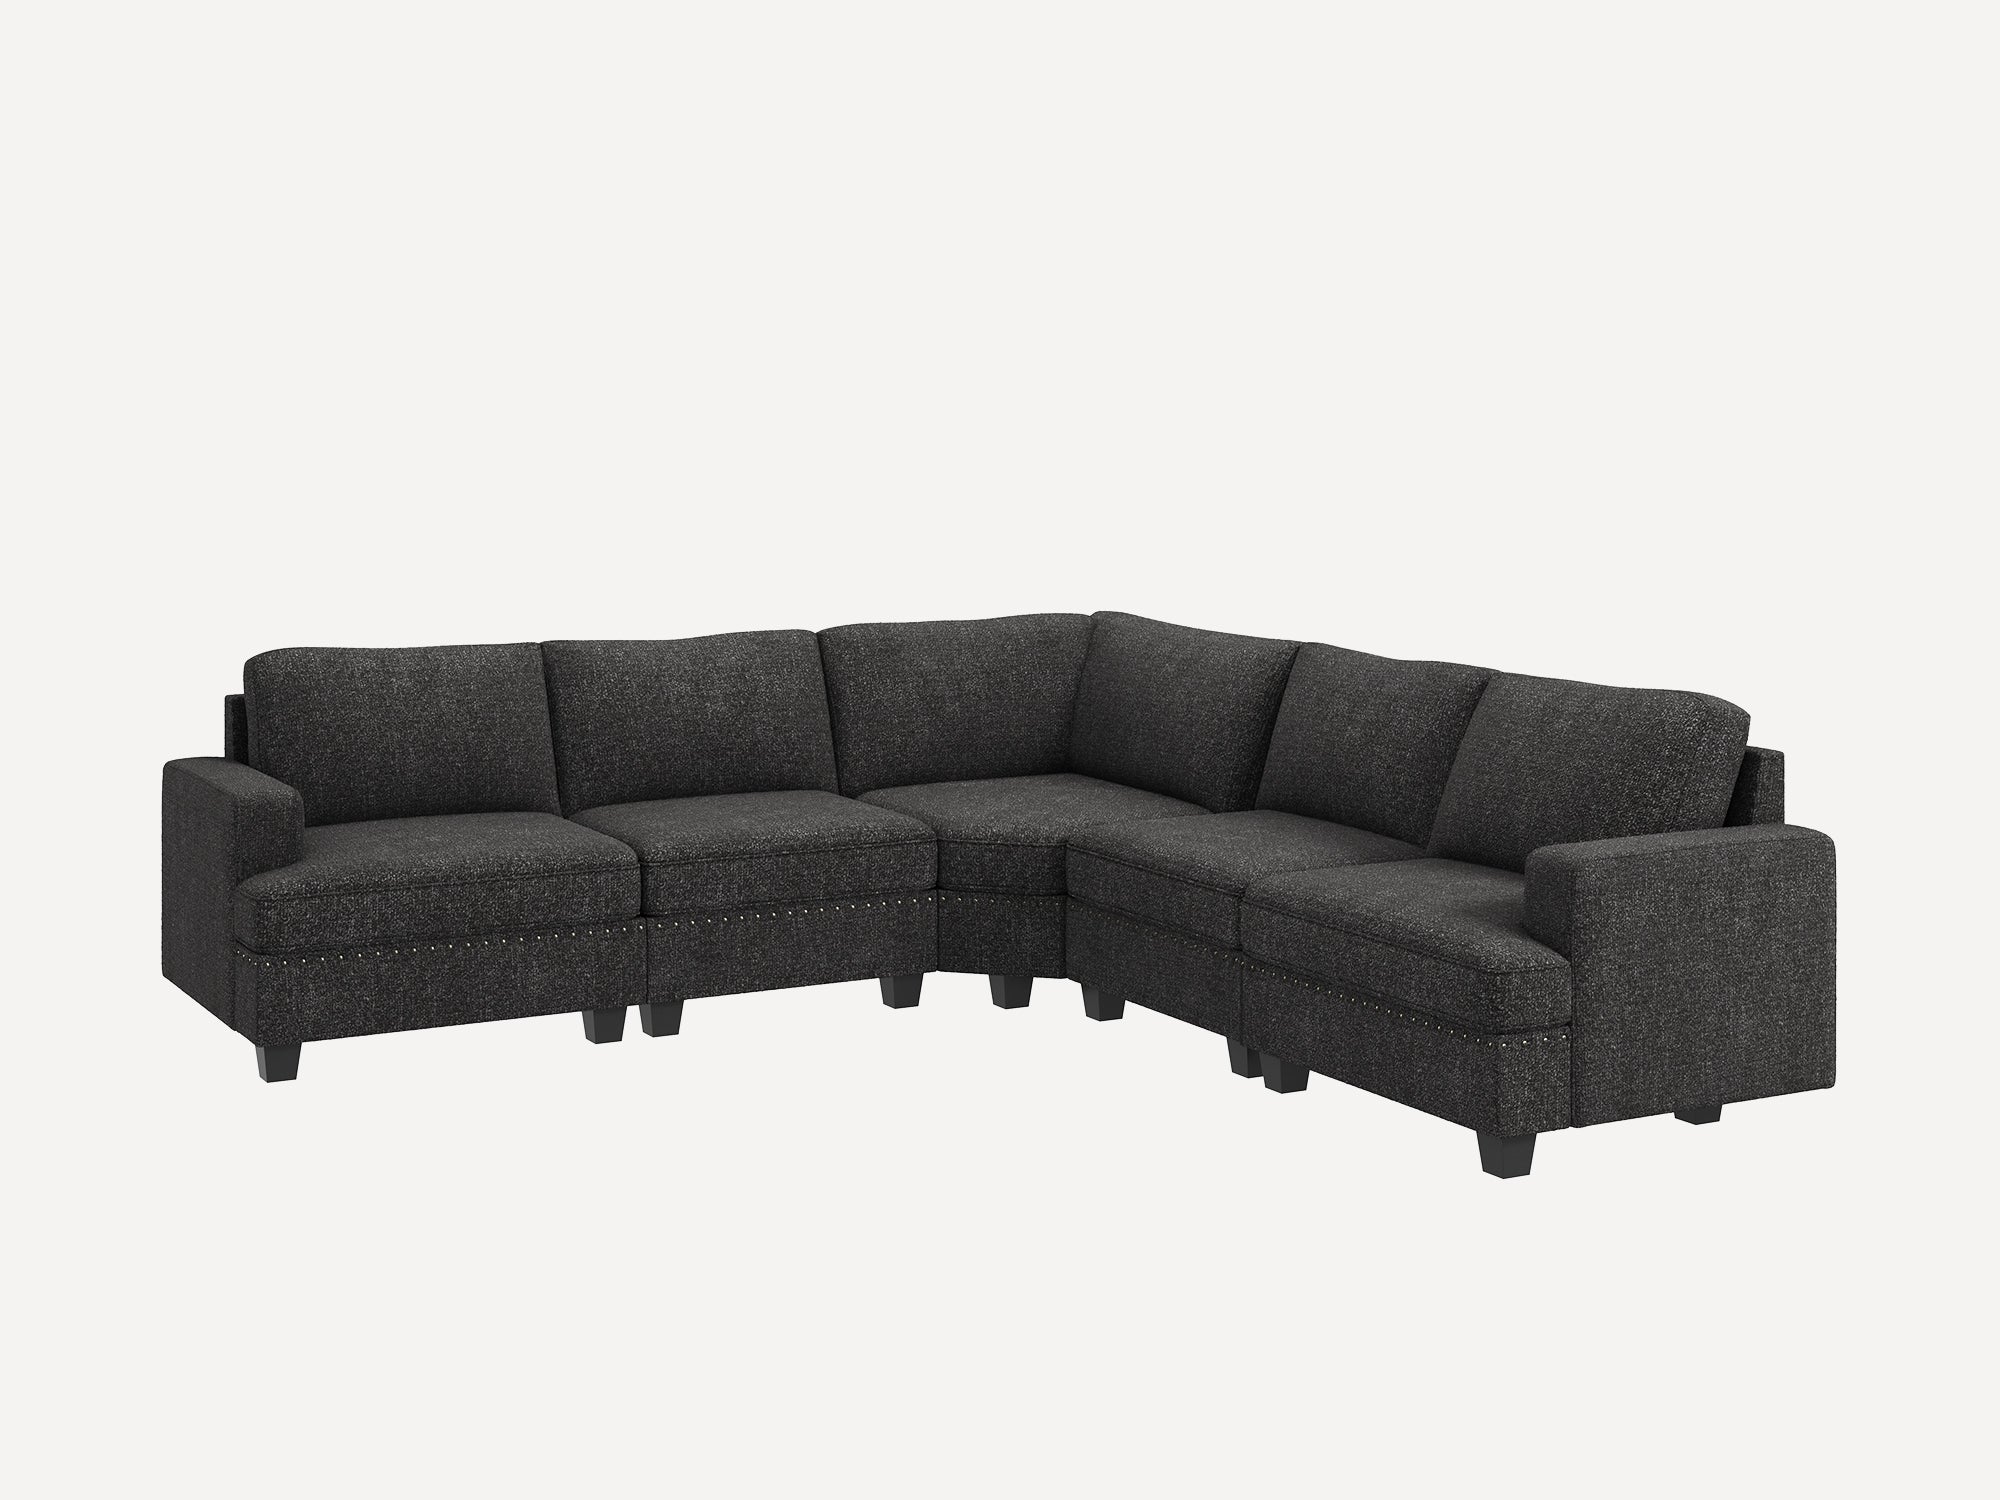 HONBAY 5-Seat Corner Modular Sofa  Oversized Convertible Sectional Sofa Couch for Living Room #Color_Dark Grey